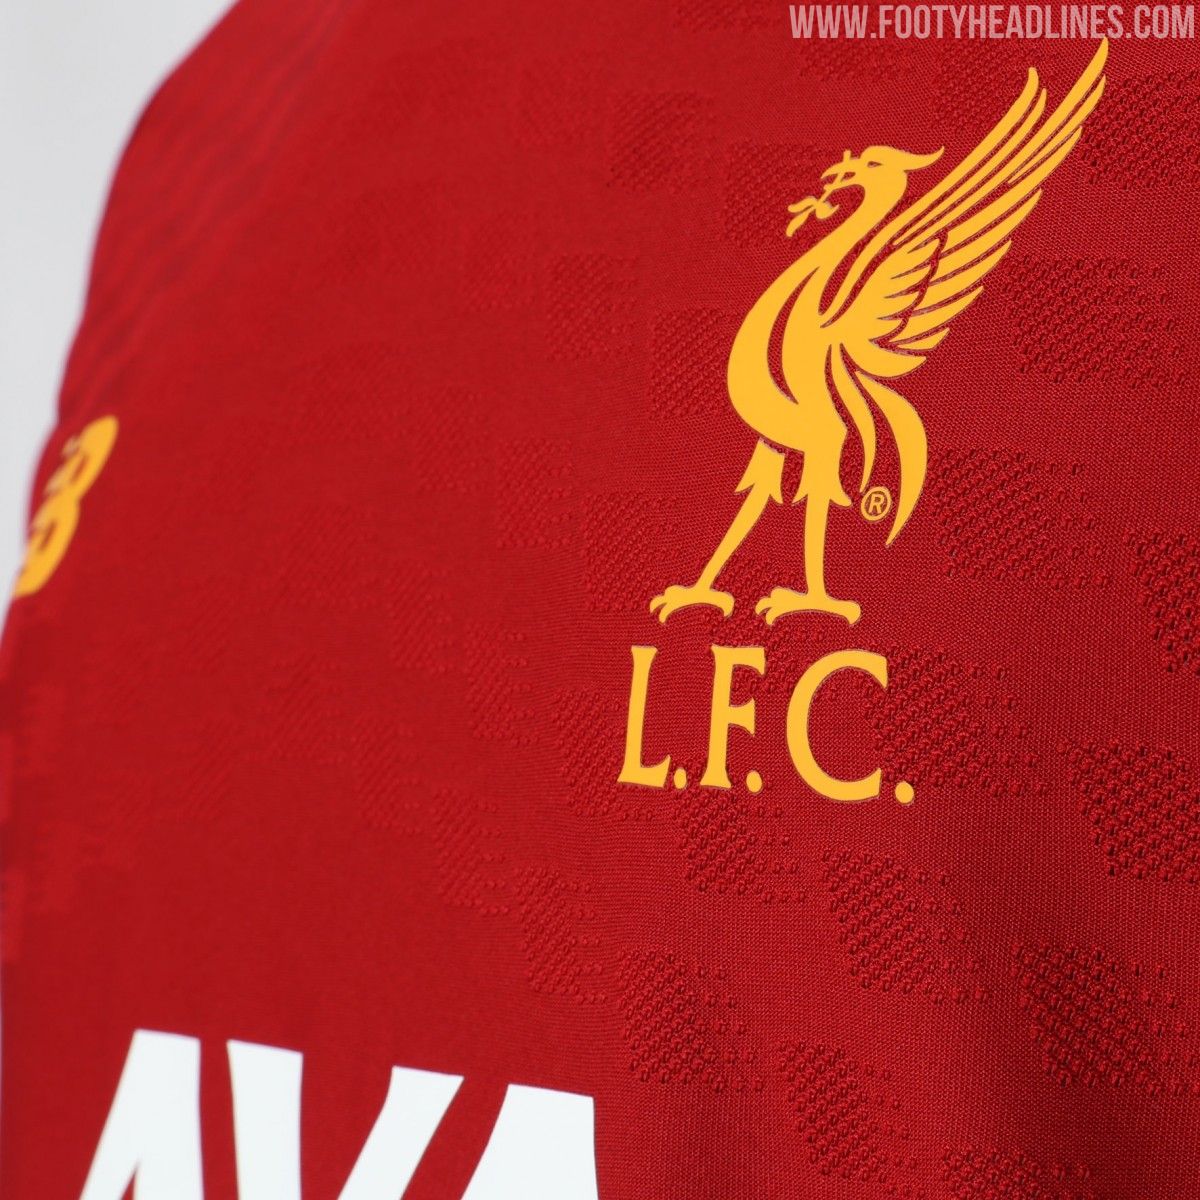 New Sponsor: Full Liverpool 19-20 Training + Pre-Match Collection ...